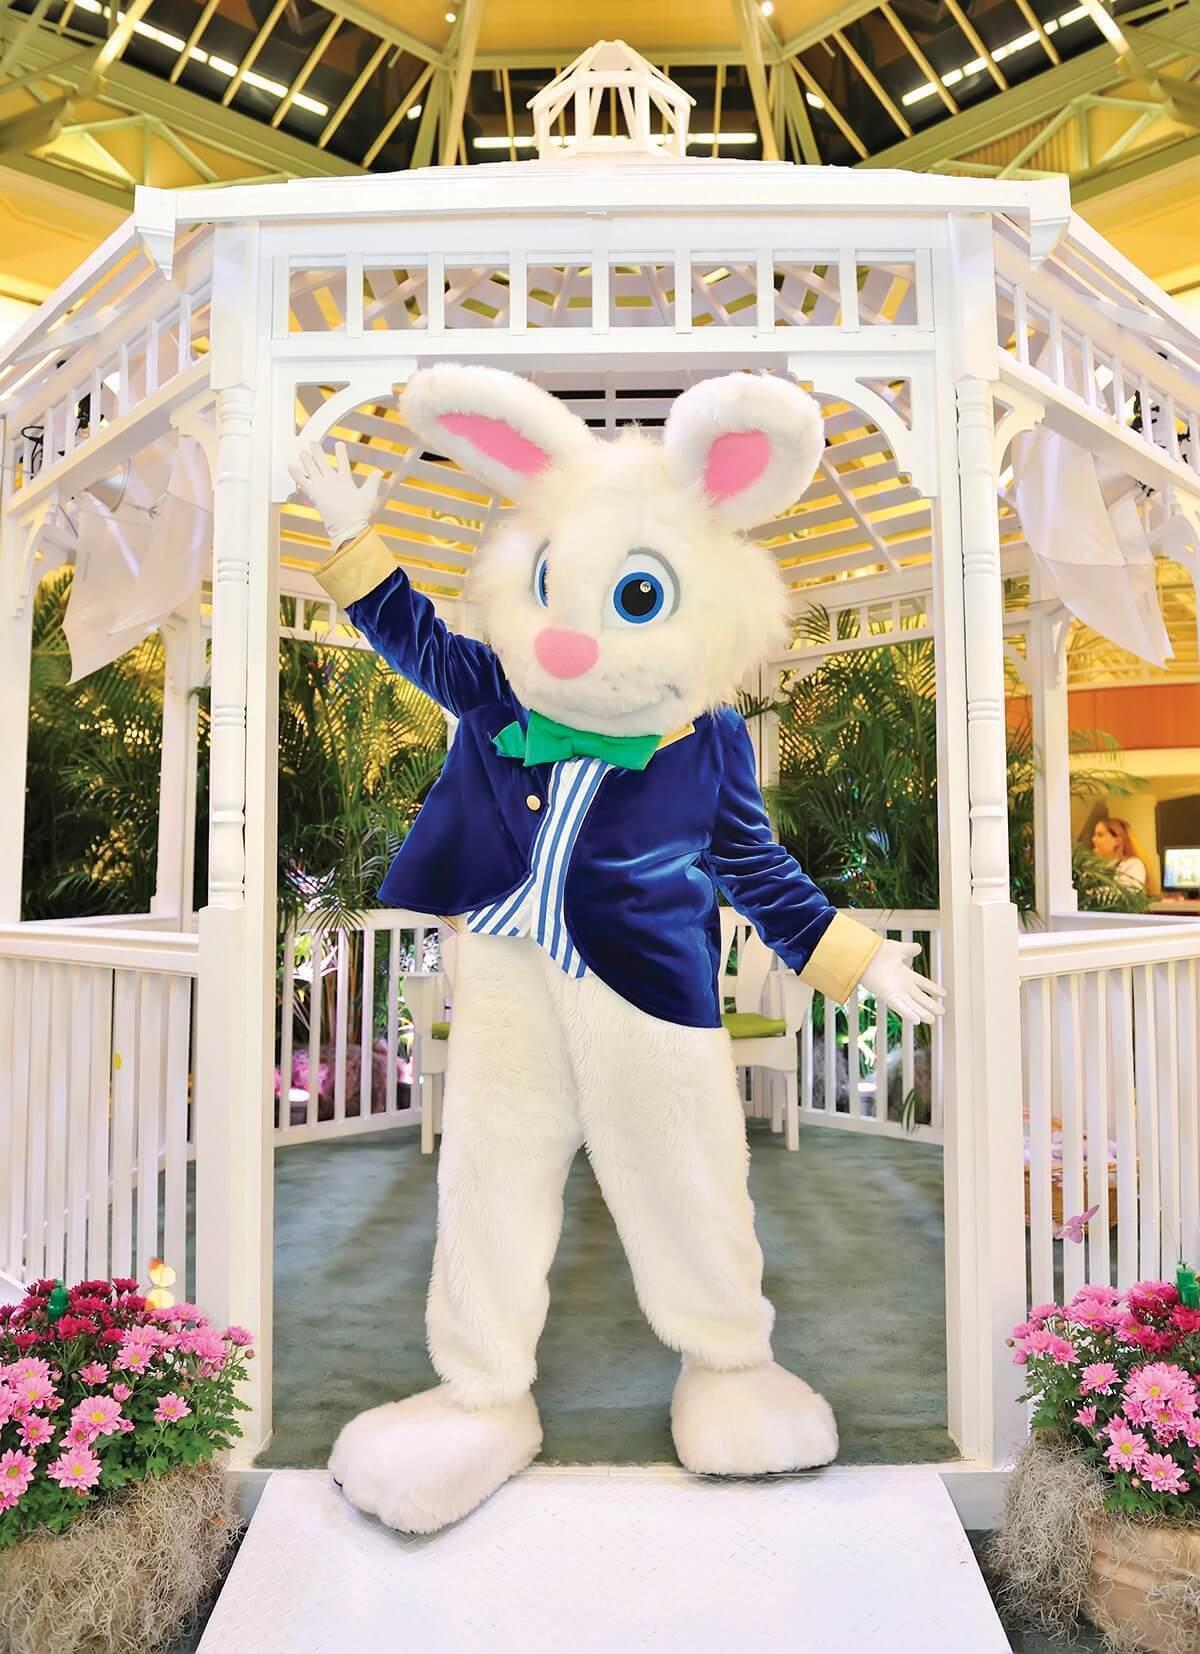 An Easter bunny ready to take pictures with families in a mall.